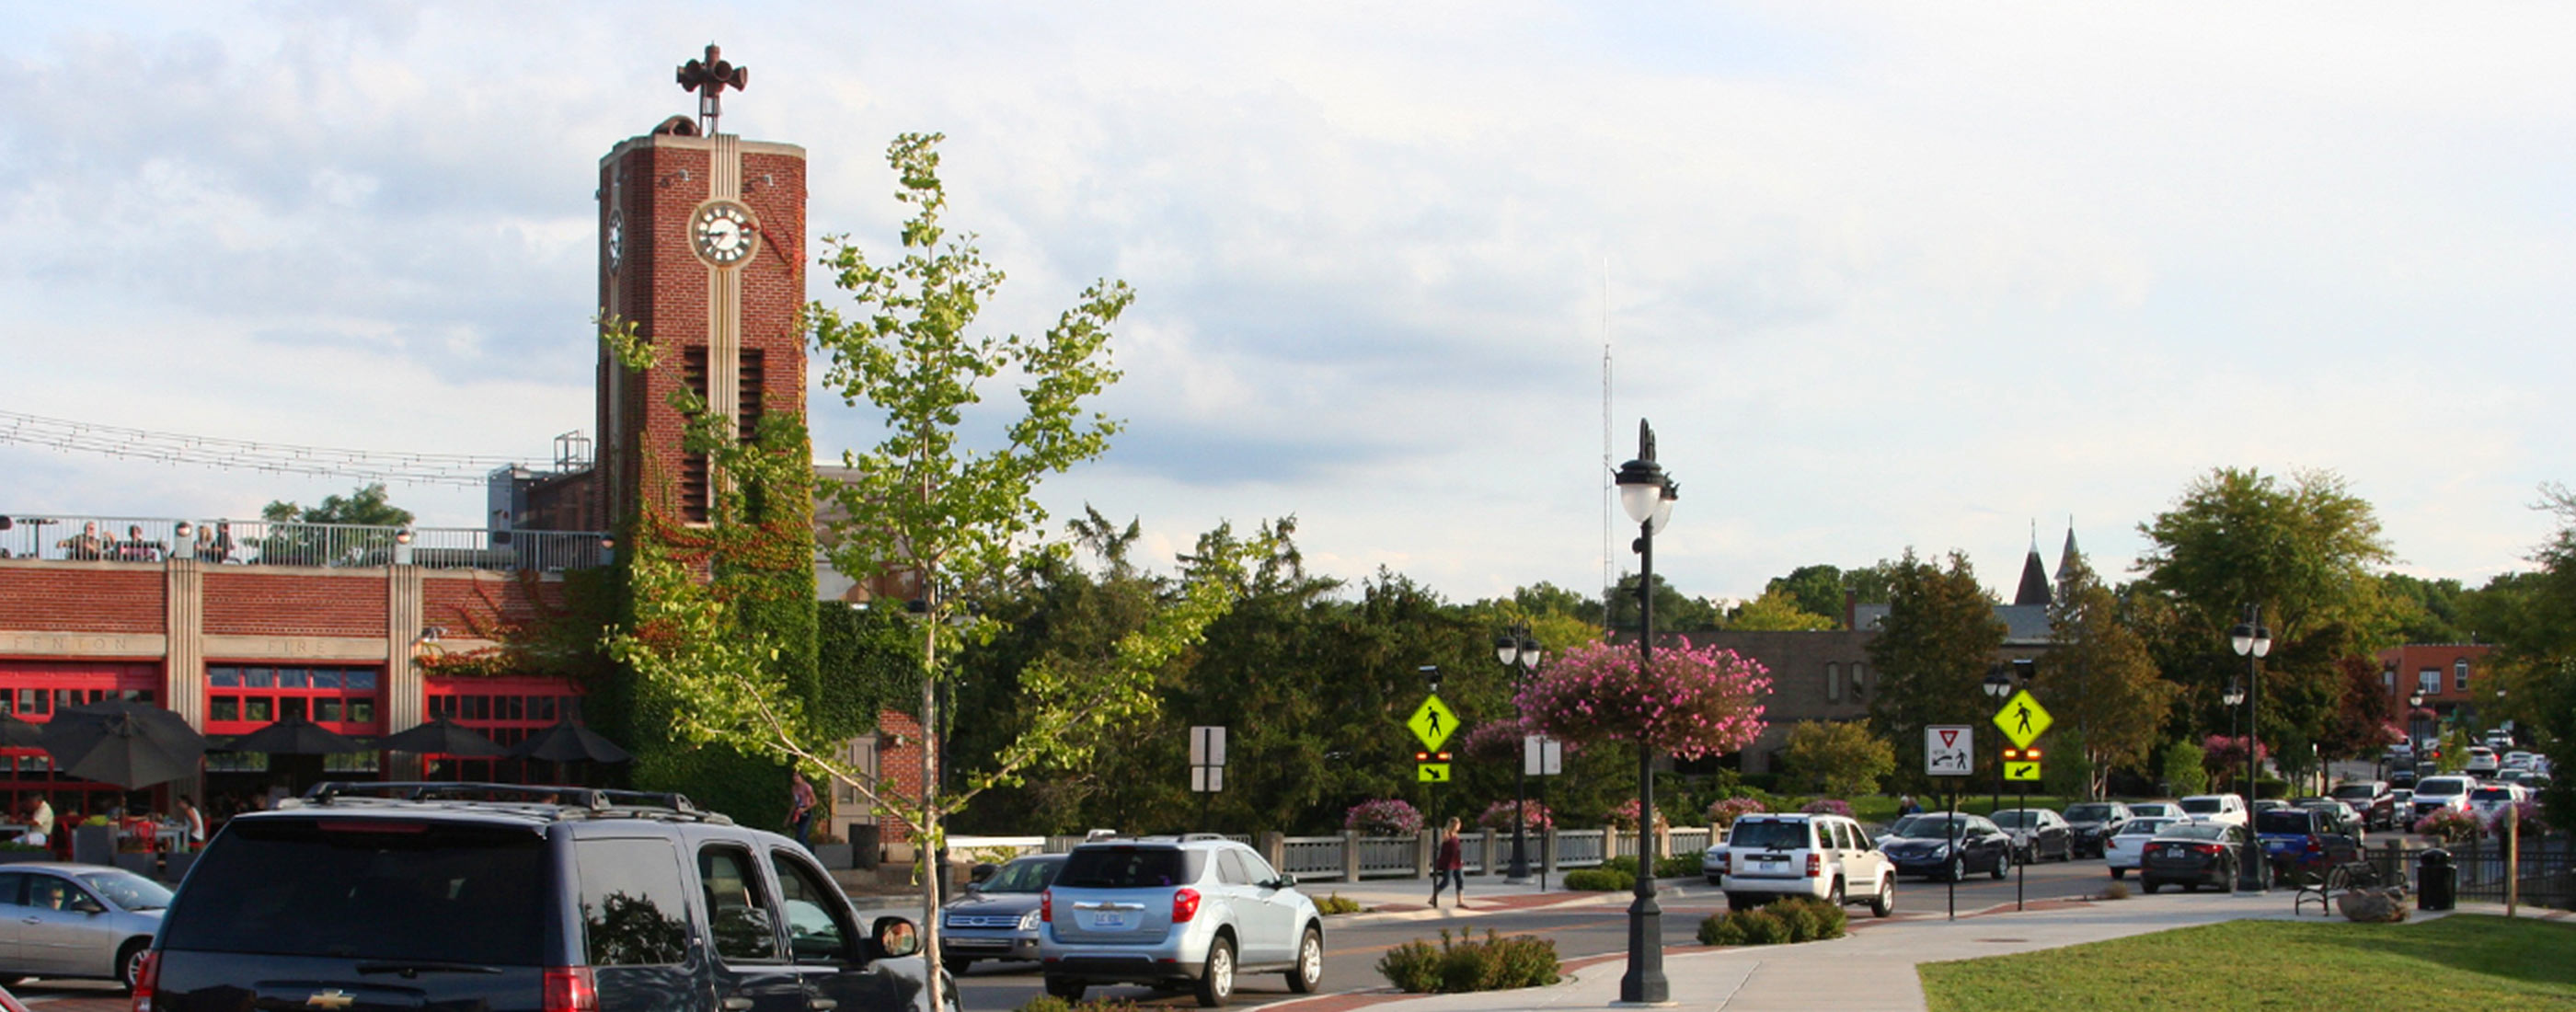 Fenton, Michigan’s downtown streetscape and road rehabilitation project, led by OHM Advisors, addressed both pedestrian and parking needs.